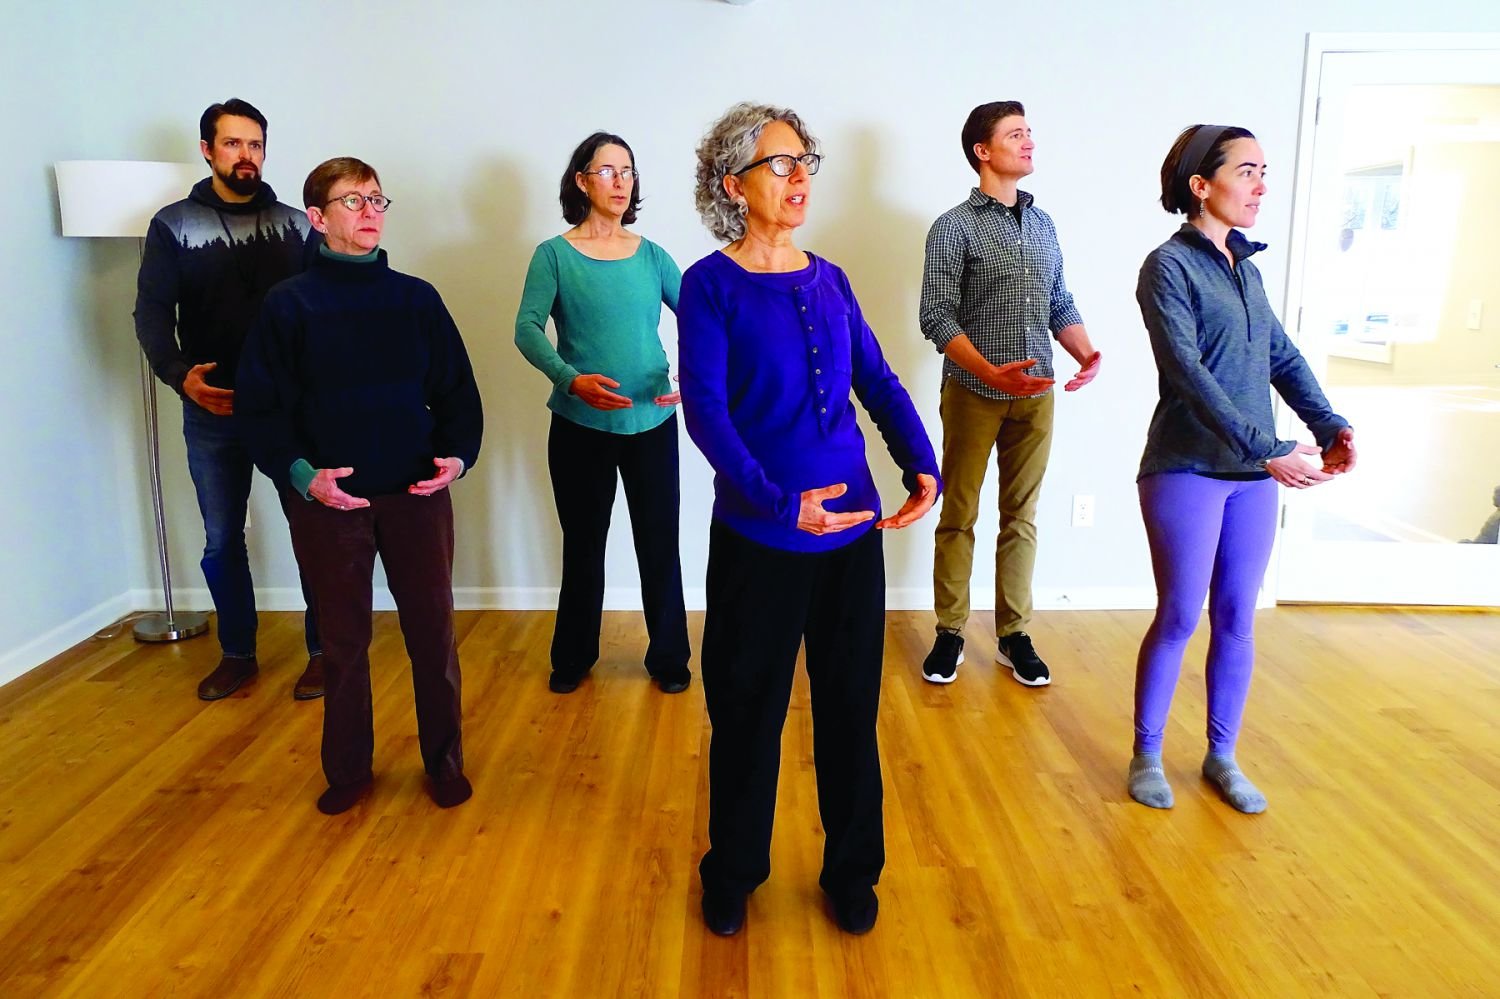 Diane Alex, center, will lead the “Six Healing Sounds” workshop at Koru Real Wellness in Doylestown March 31.